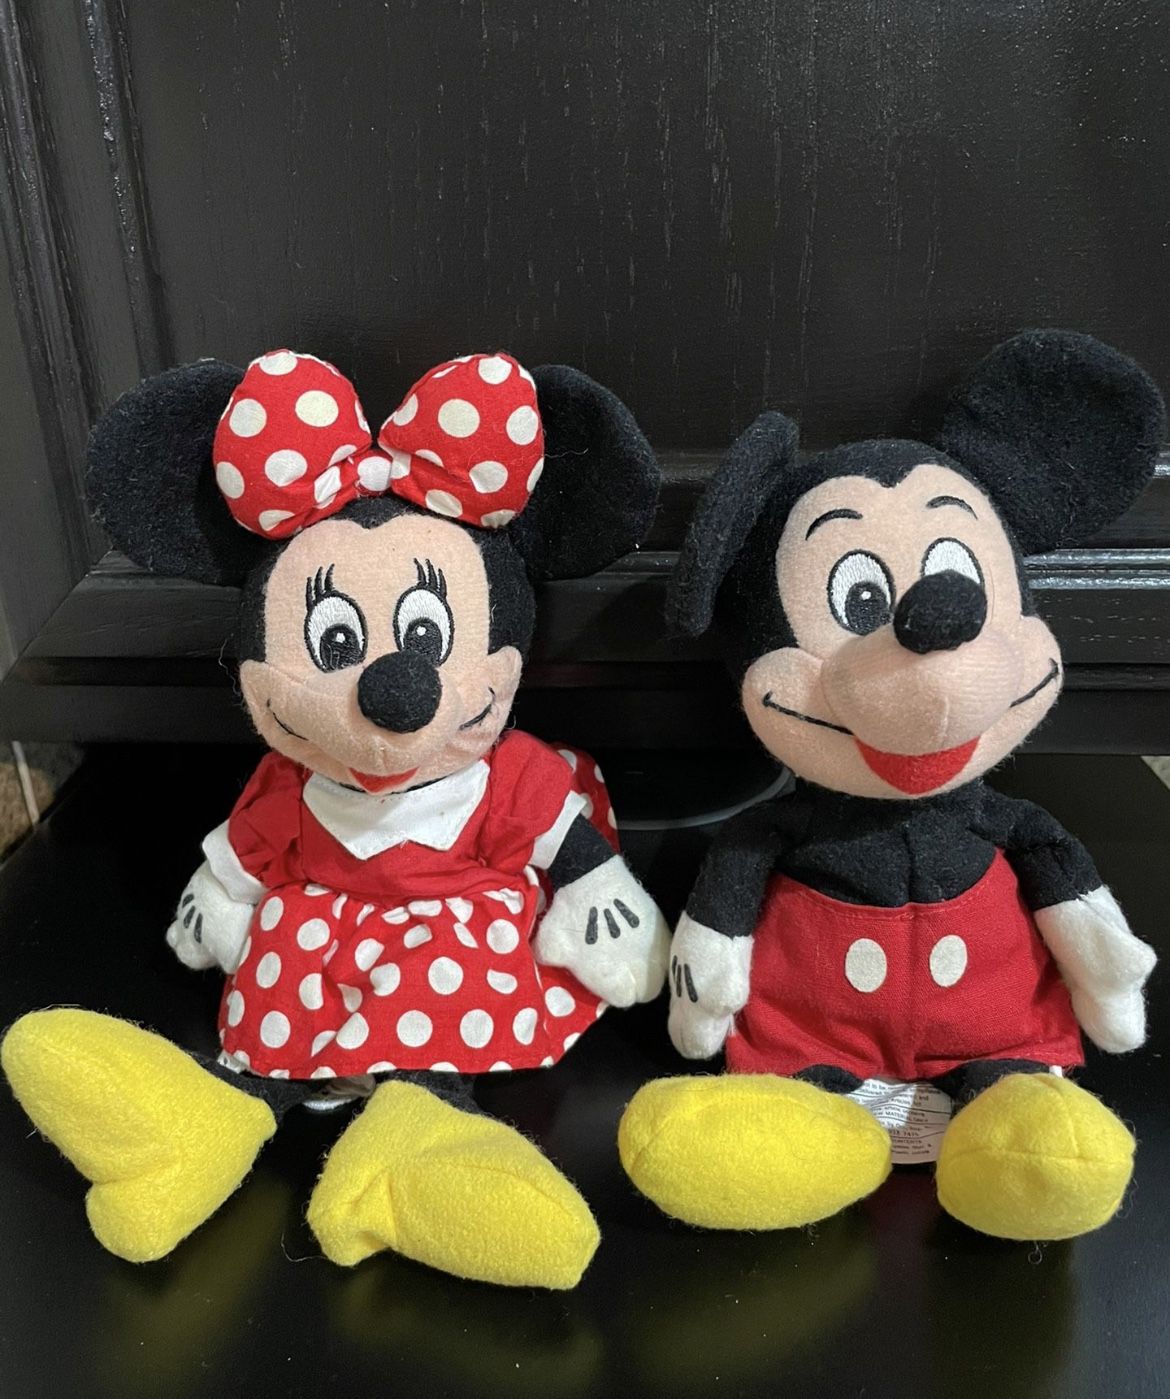 Mickey and Minnie Mouse Plush 8" inches - Sold as a pair